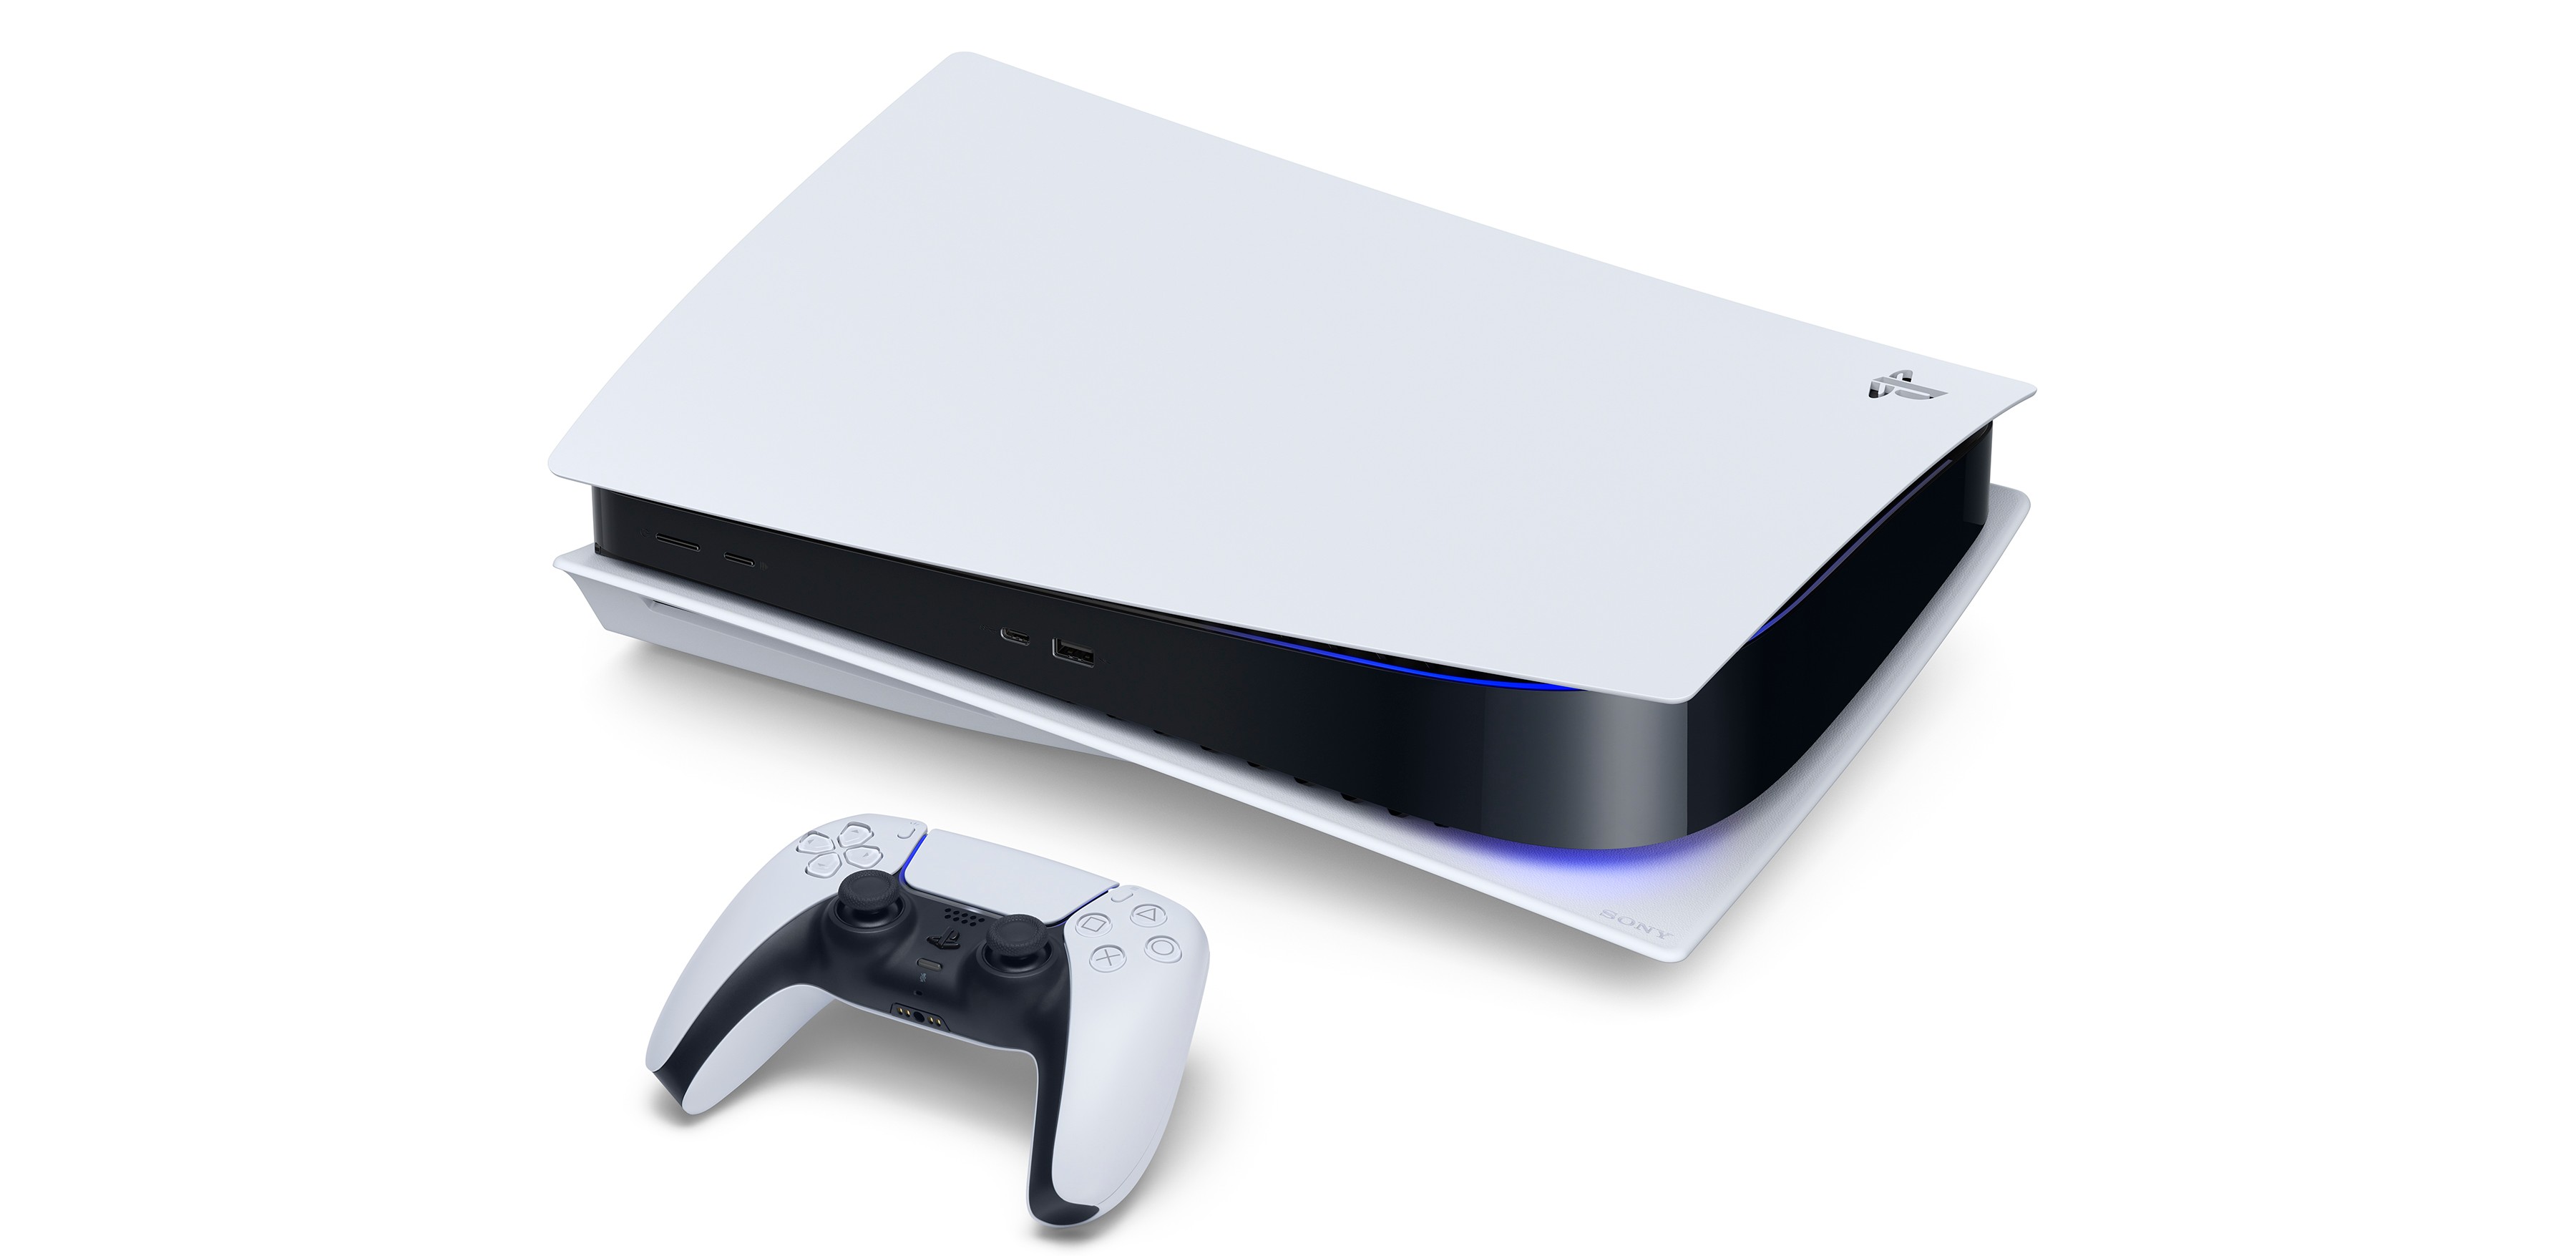 Should you install an SSD in your PlayStation 4?